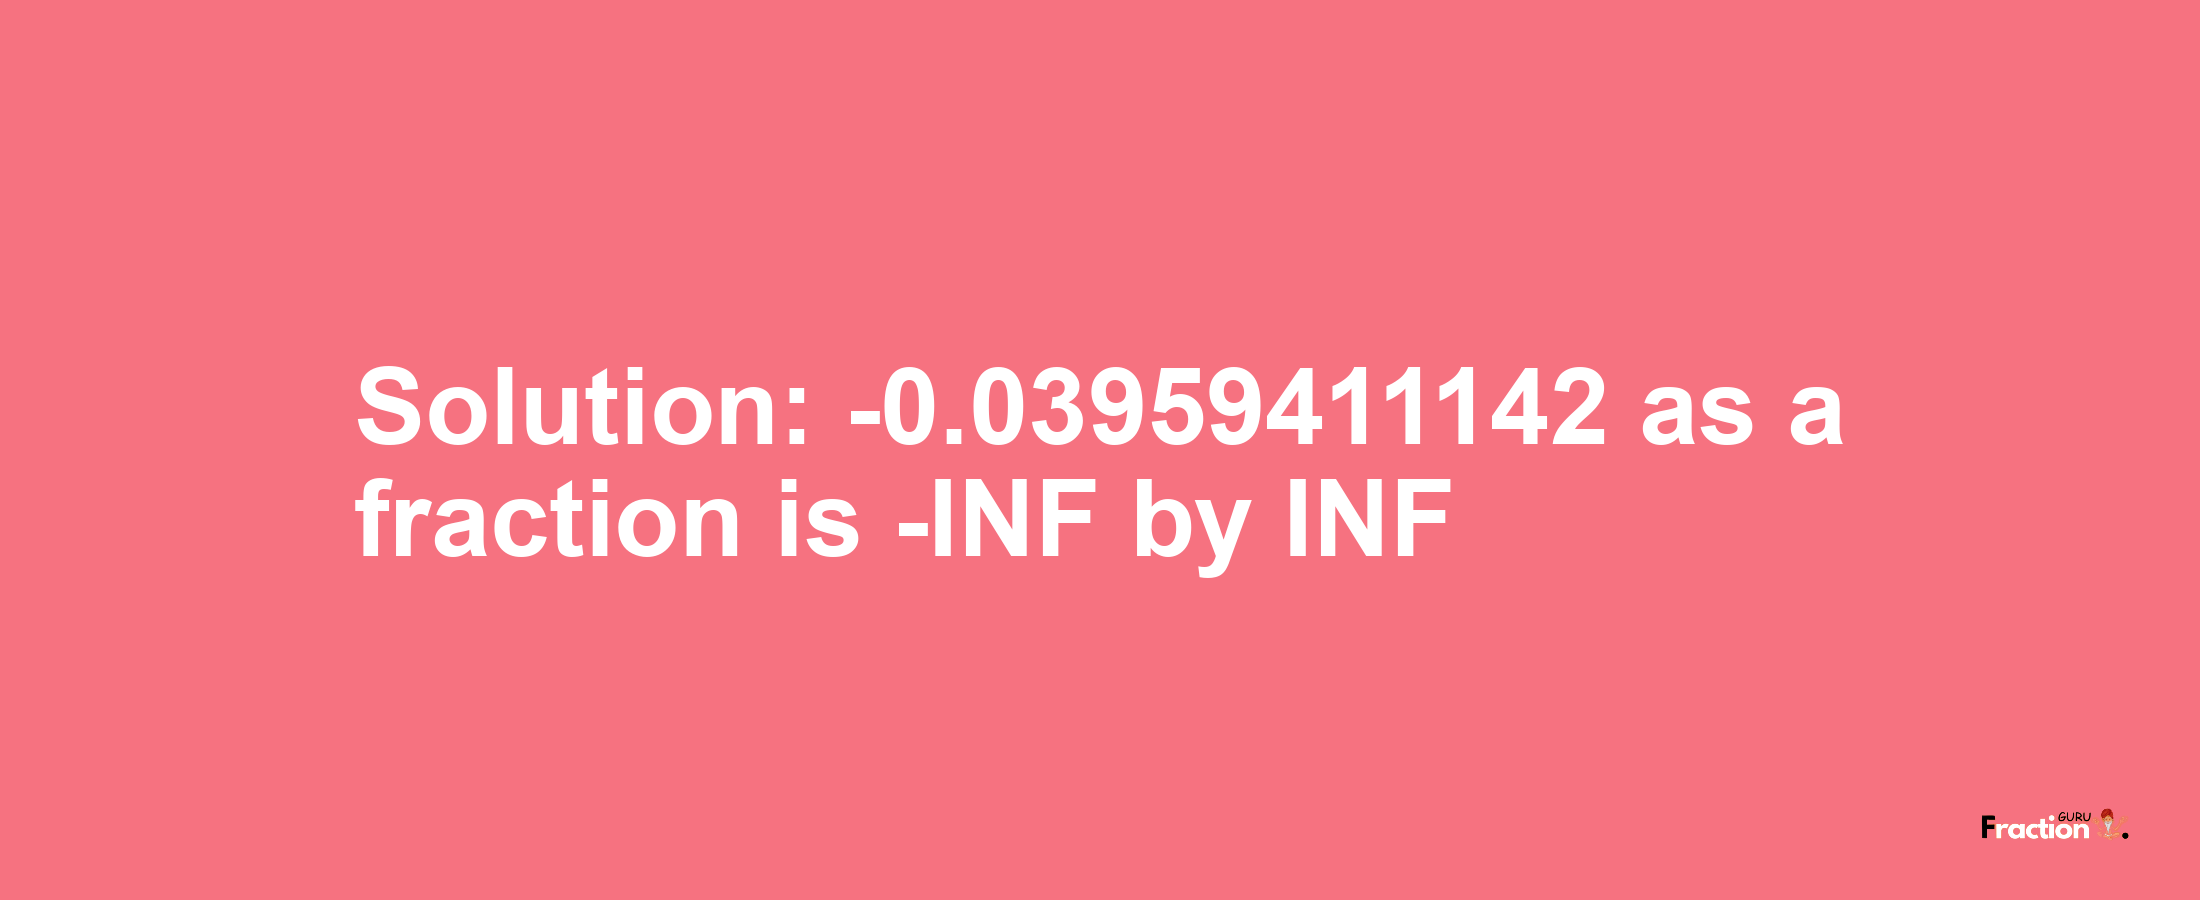 Solution:-0.03959411142 as a fraction is -INF/INF